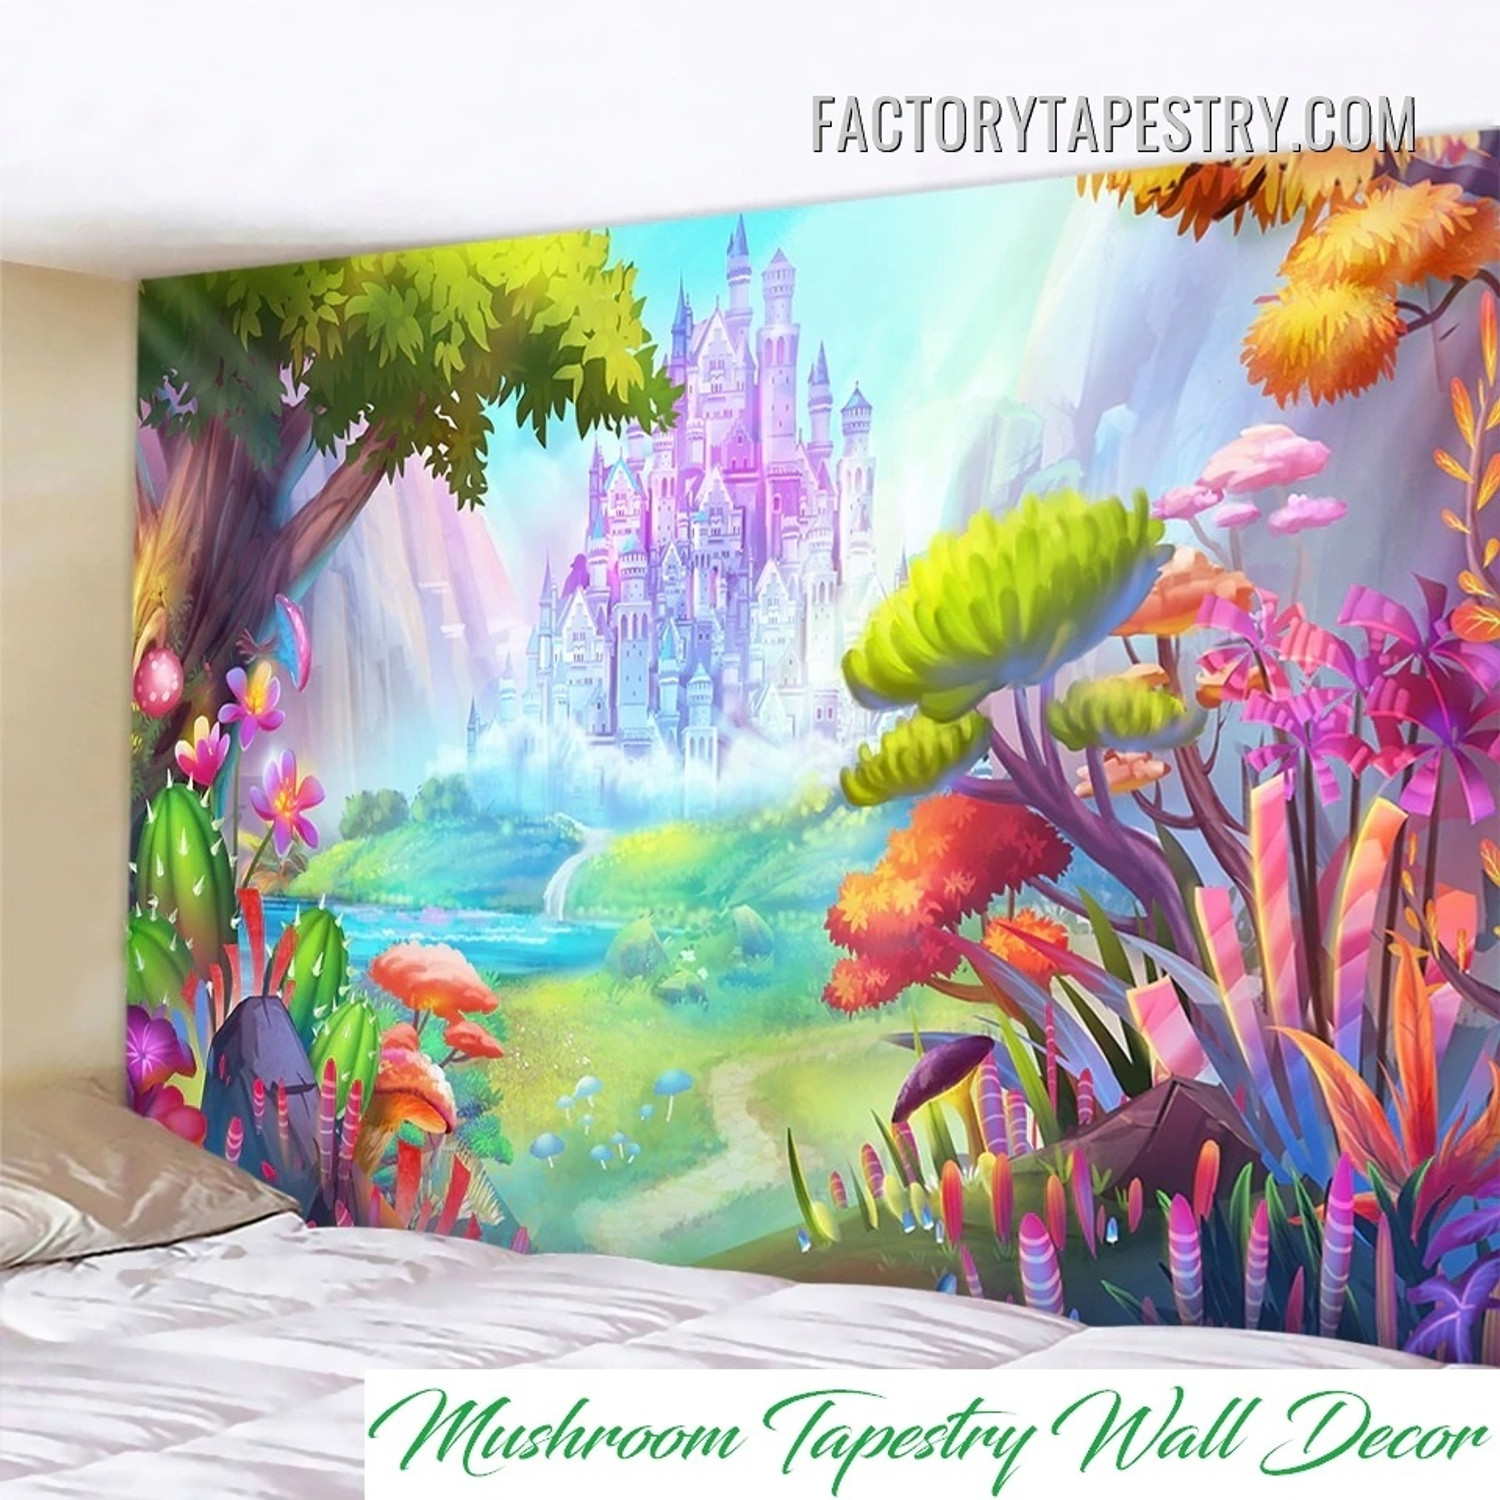 Dreamy Wonderland Fantasy Nature Landscape Psychedelic Wall Art Tapestry